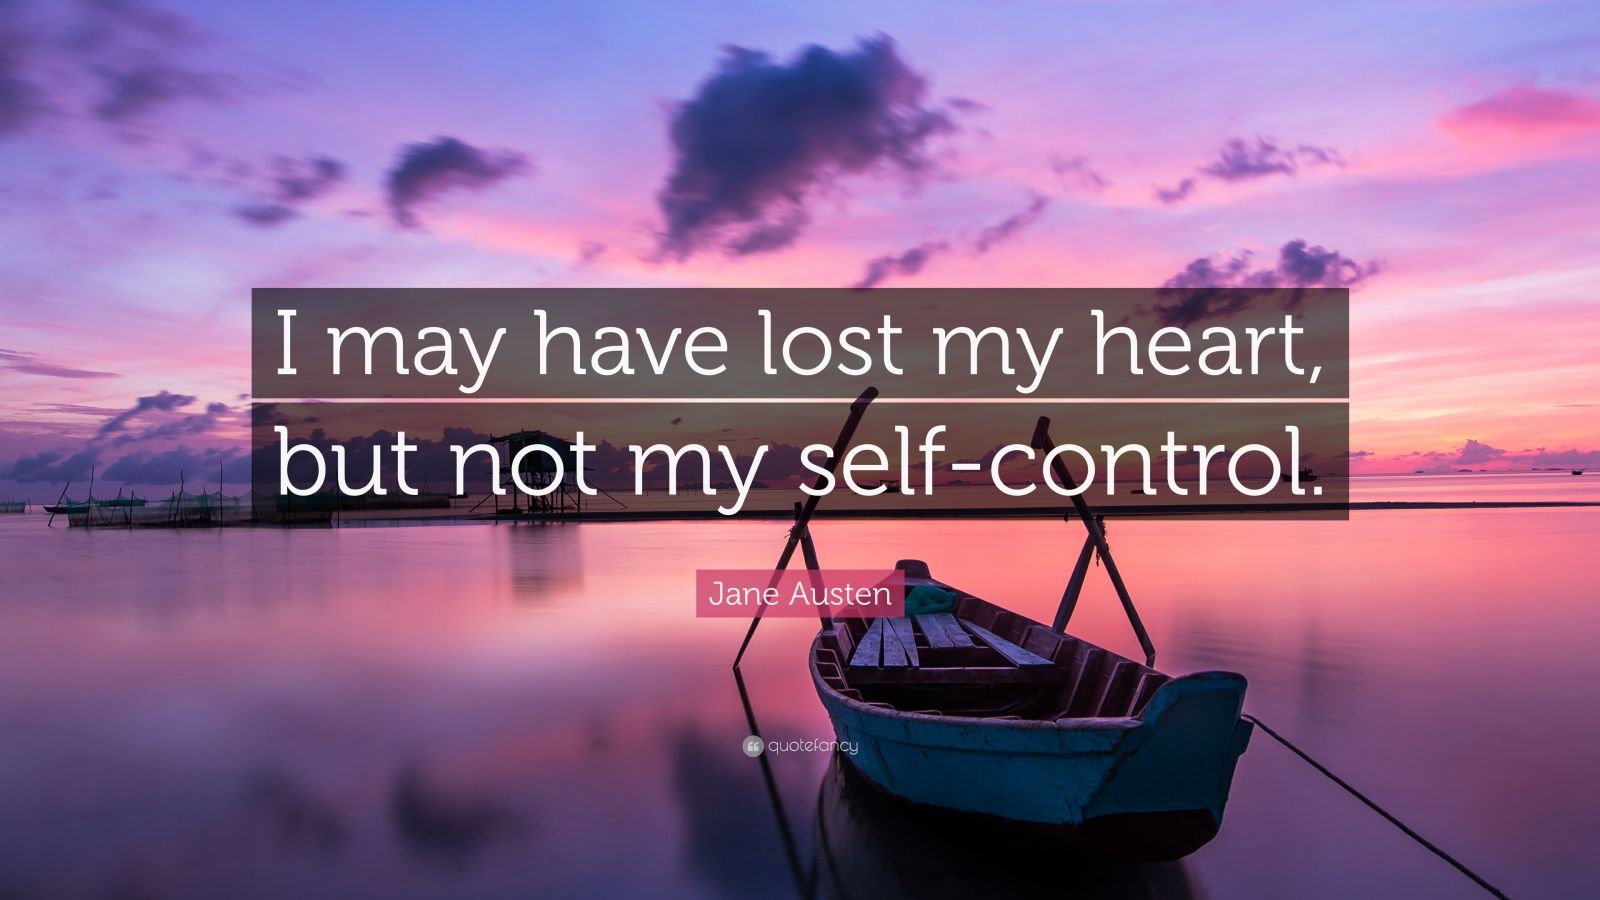 Jane Austen Quote: "I may have lost my heart, but not my ...